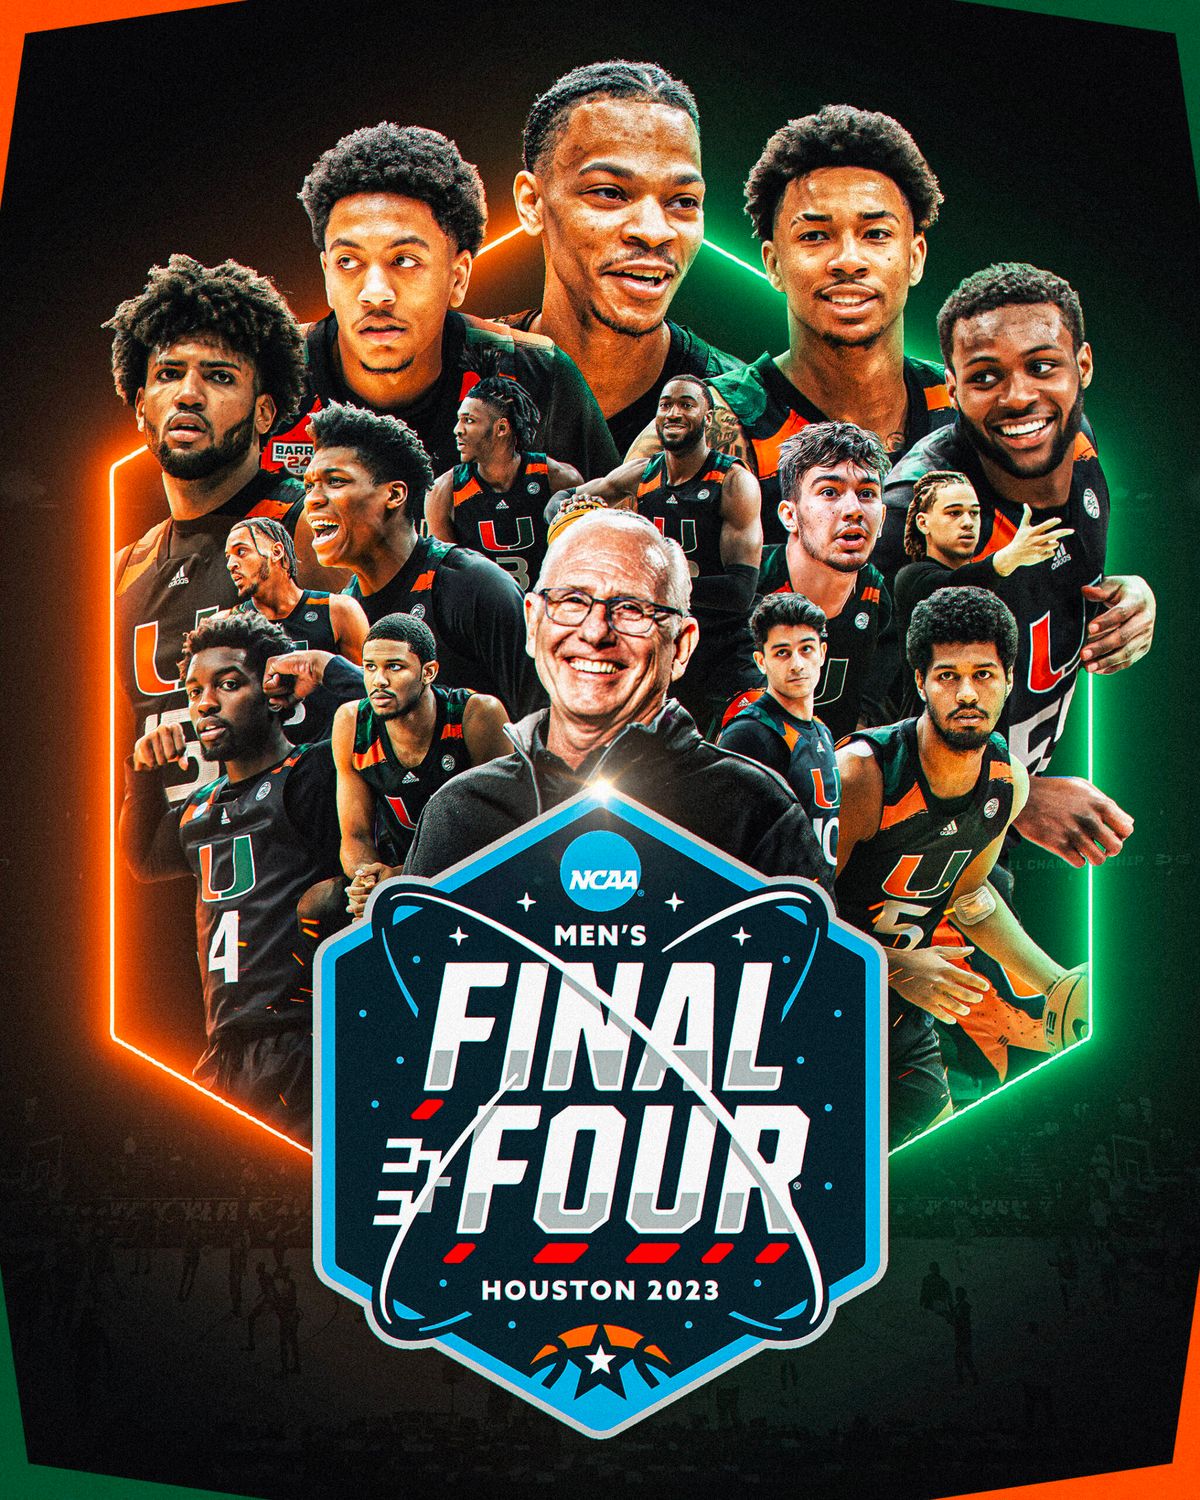 How did Miami Hurricanes get to the Final Four?